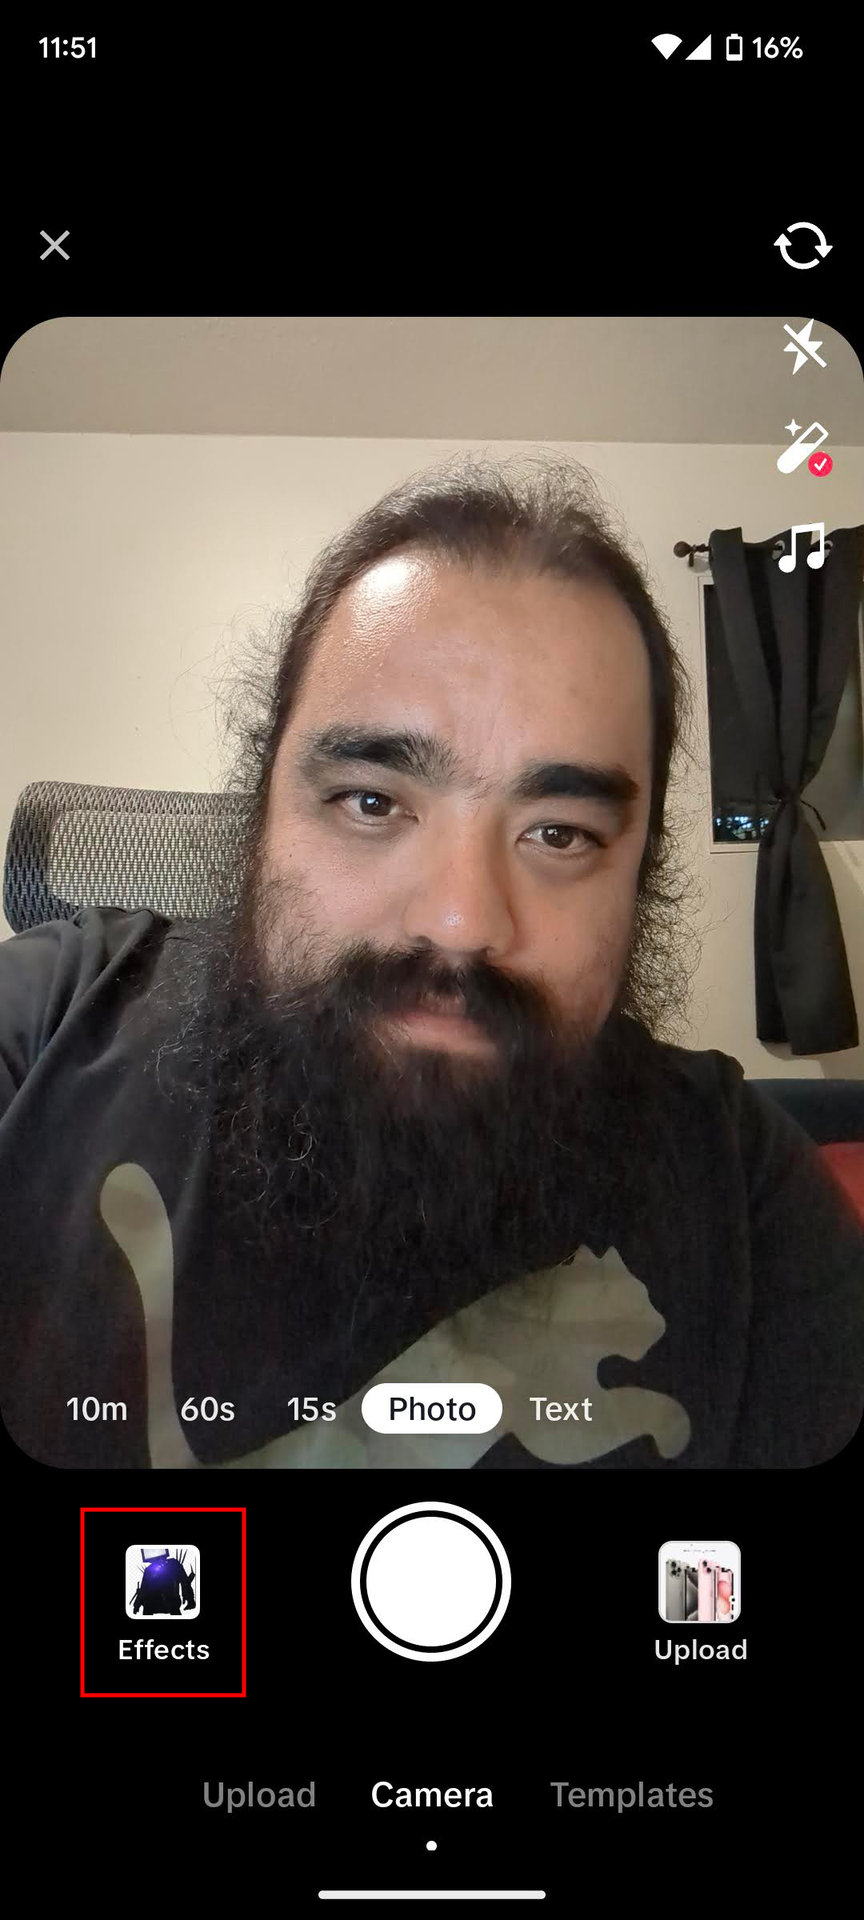 How to use the old age filter on TikTok (2)